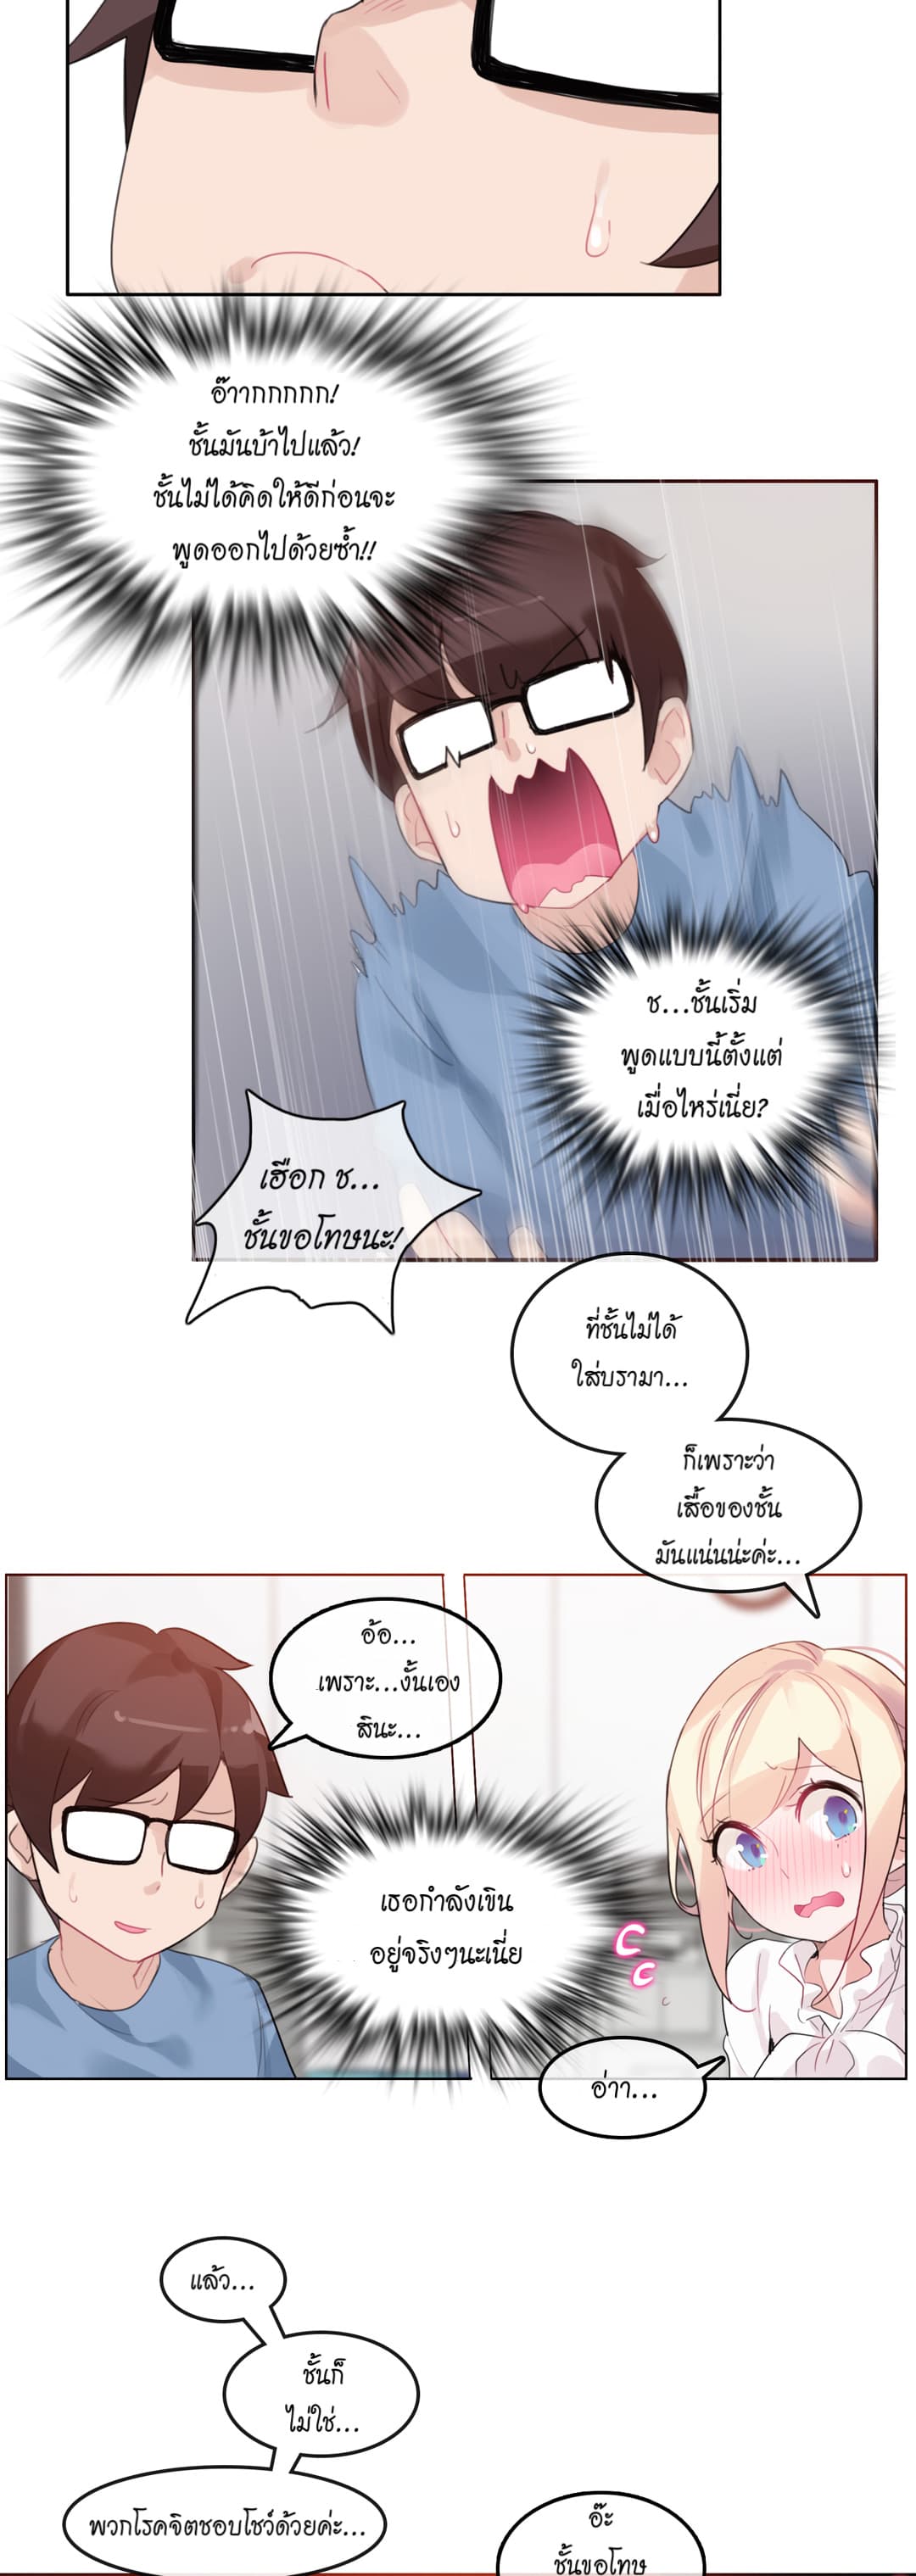 A Pervert’s Daily Life 24 (9)